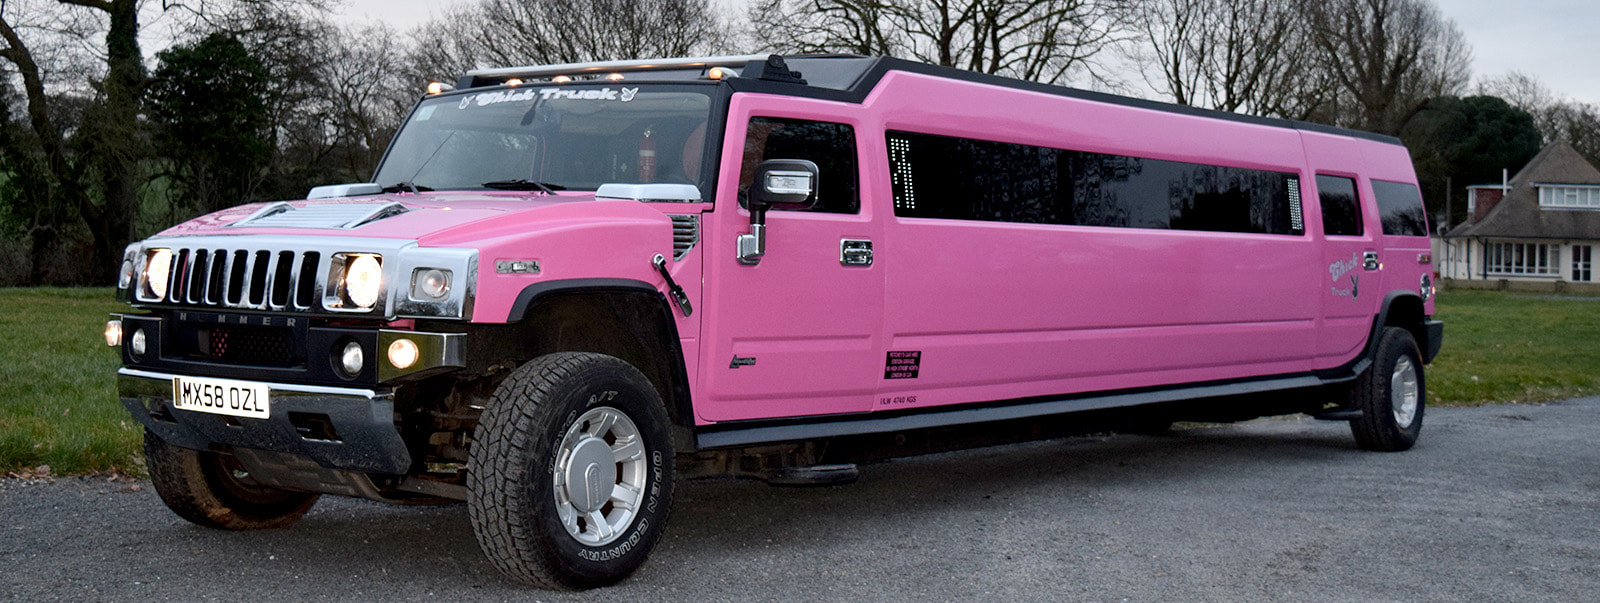 Pink Hummer Limo Hire Rochdale